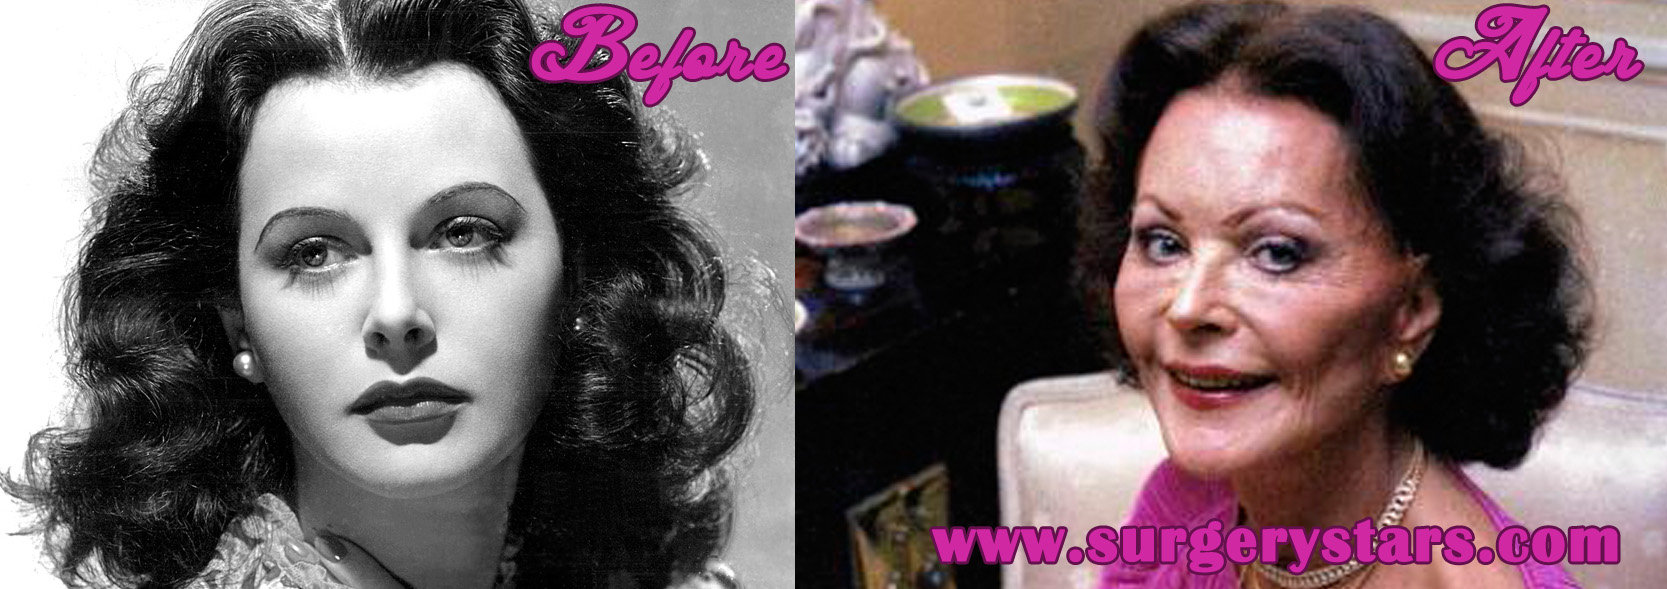 Hedy Lamarr Plastic Surgery - Before and After Pictures.